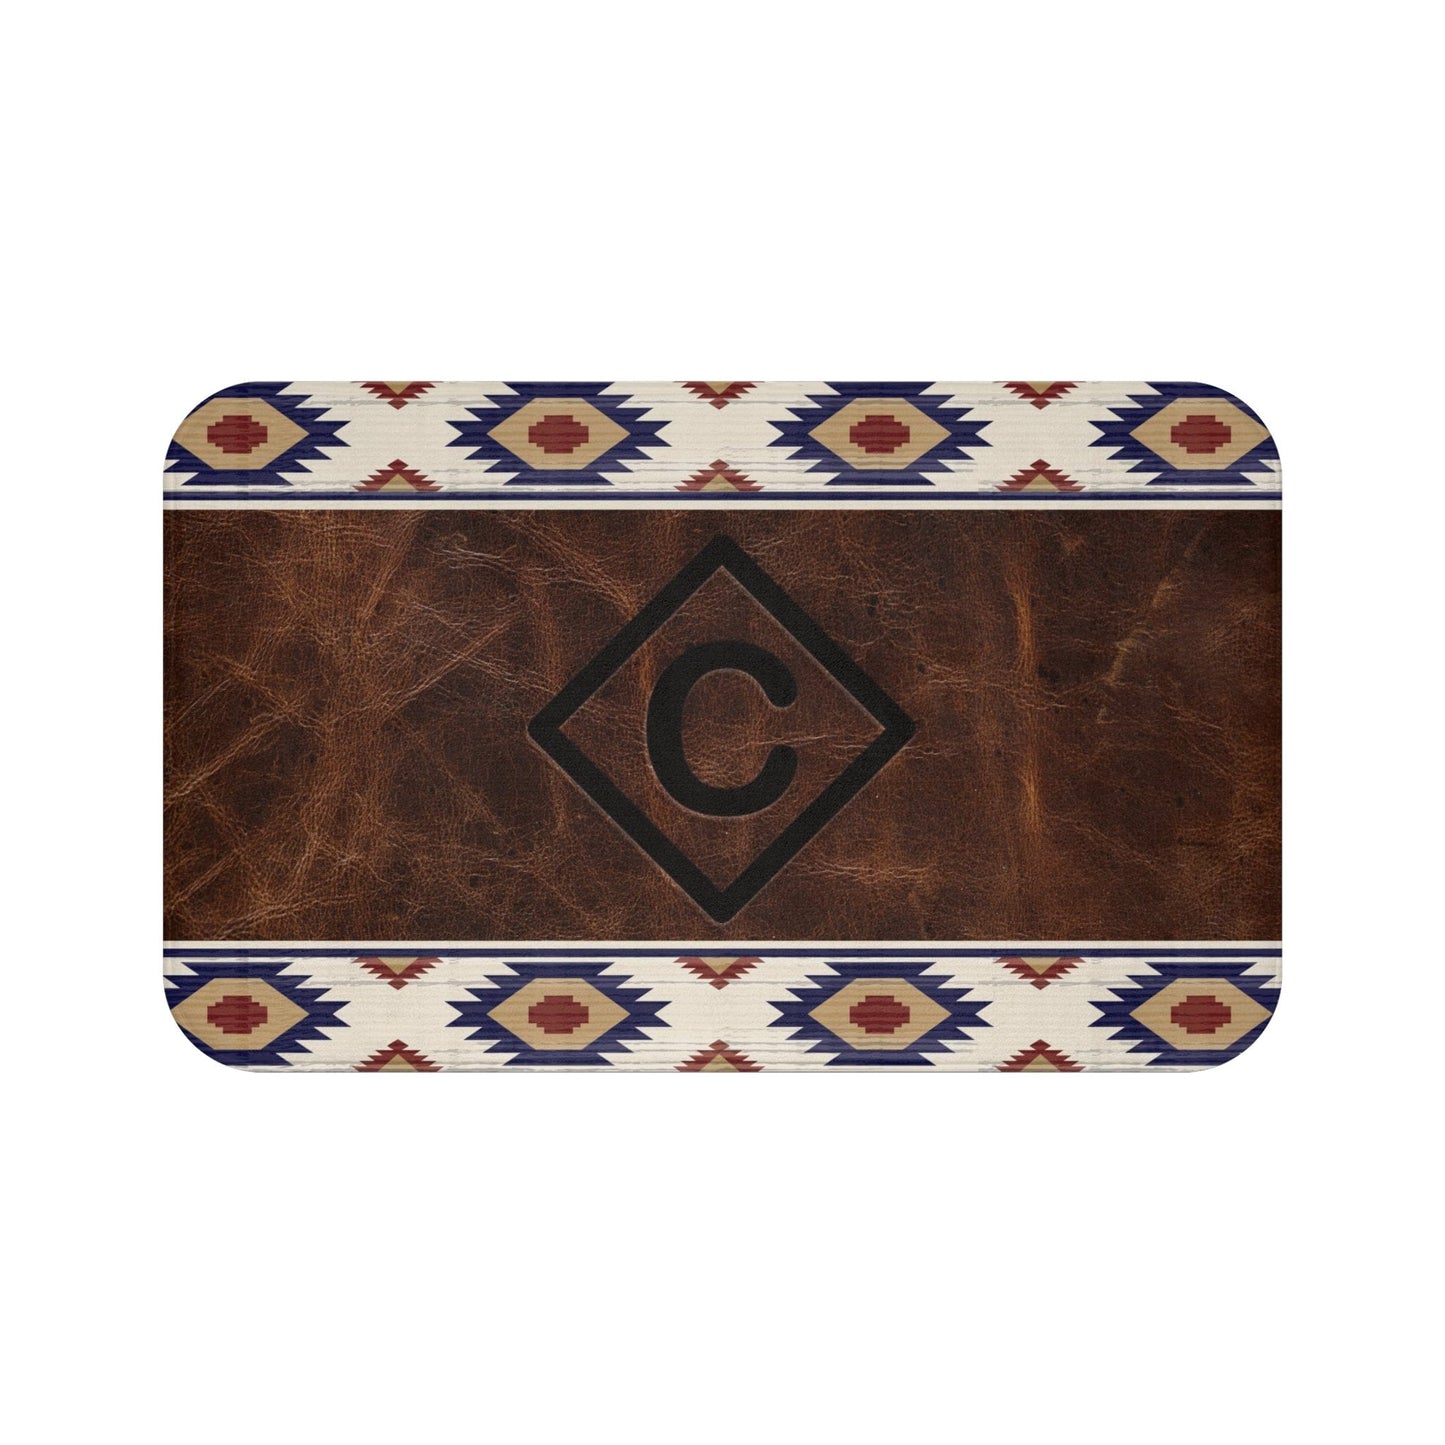 CUSTOM CATTLE BRAND Red White and Blue Aztec Leather Pattern Bath Mat Western Bathroom Home Decor For Ranch House Southwestern Decor